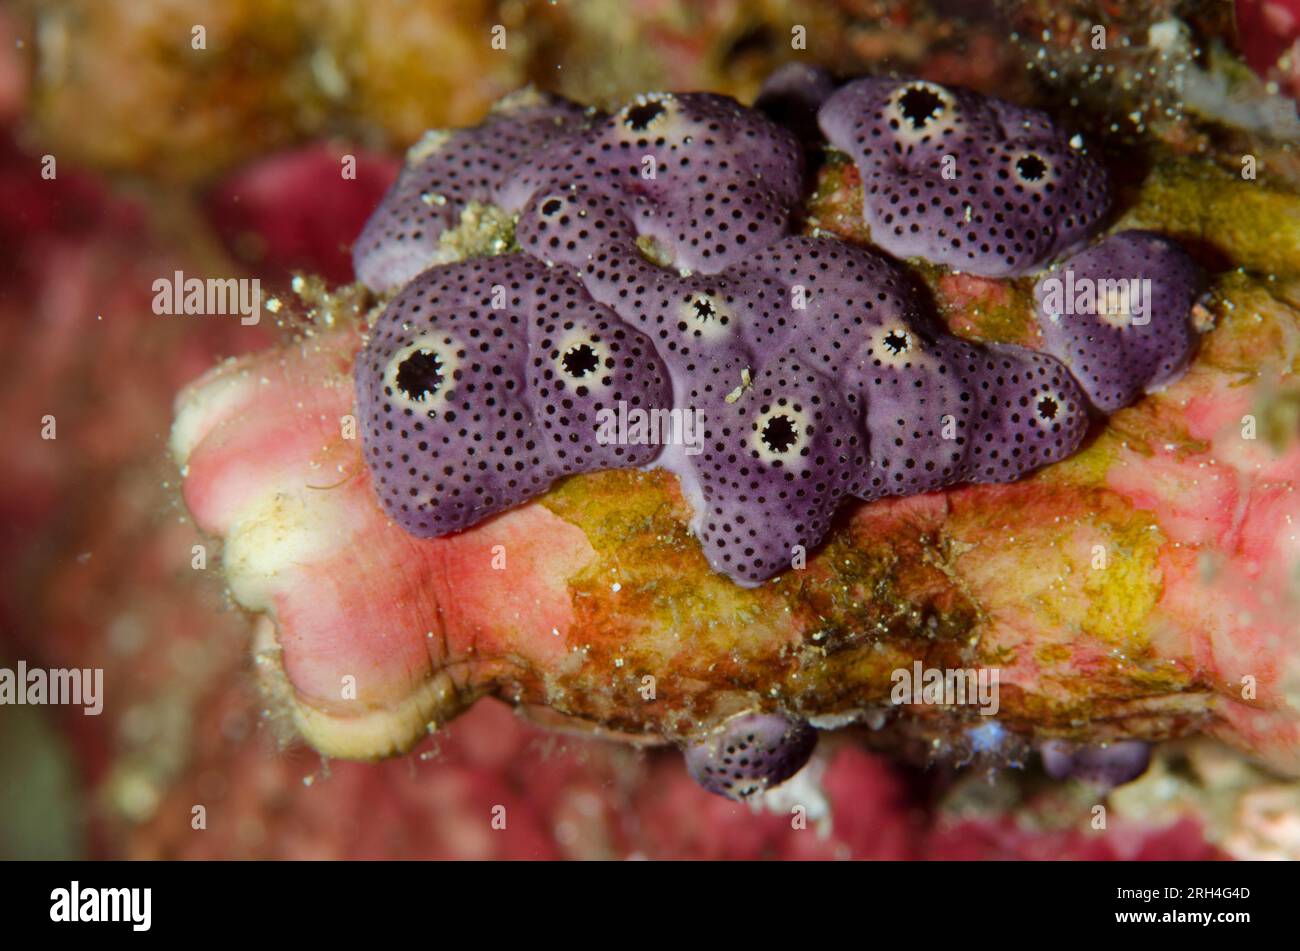 Purple Compound Ascidians, Didemnum sp, on Red Throated Ascidian, Herdmania momus, Kaino's Treasure dive site, Lembeh Straits, Sulawesi, Indonesia Stock Photo